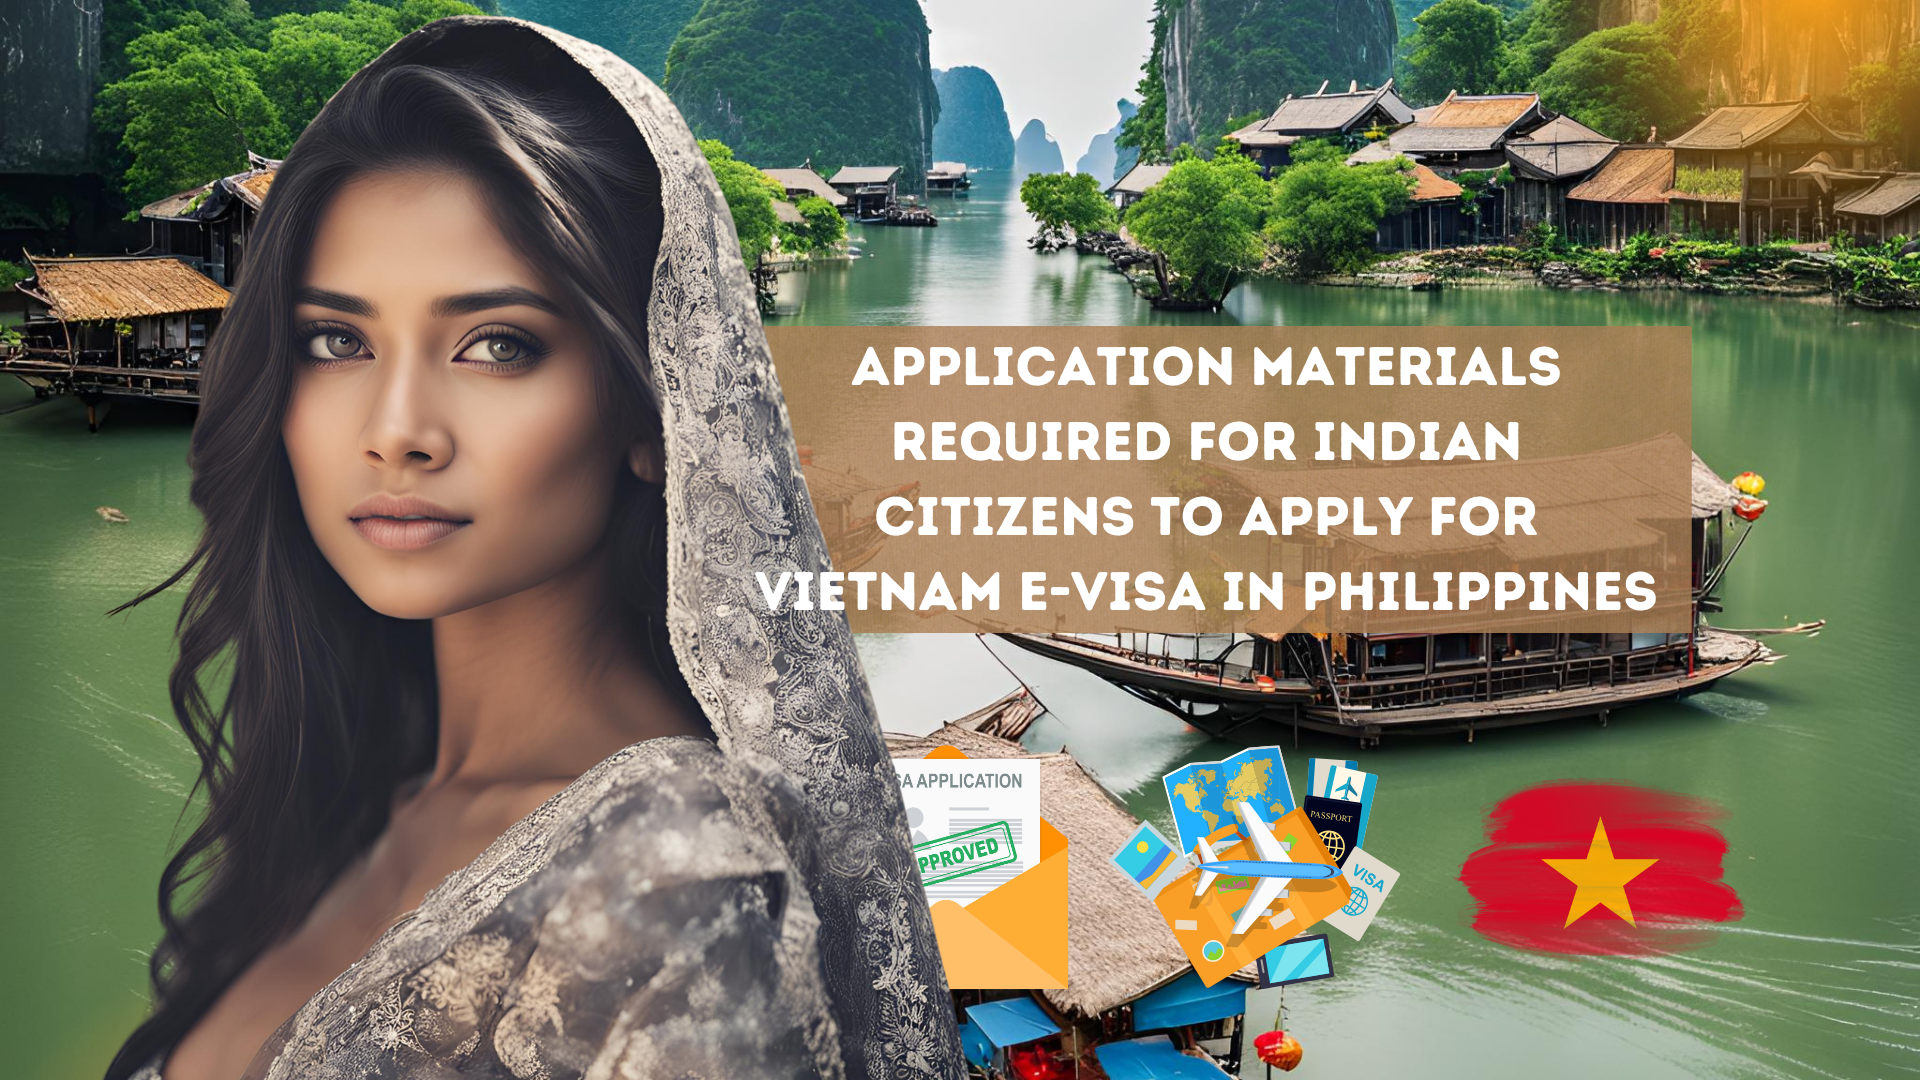 Application materials required for Indian citizens to apply for Vietnam e-visa in Philippines